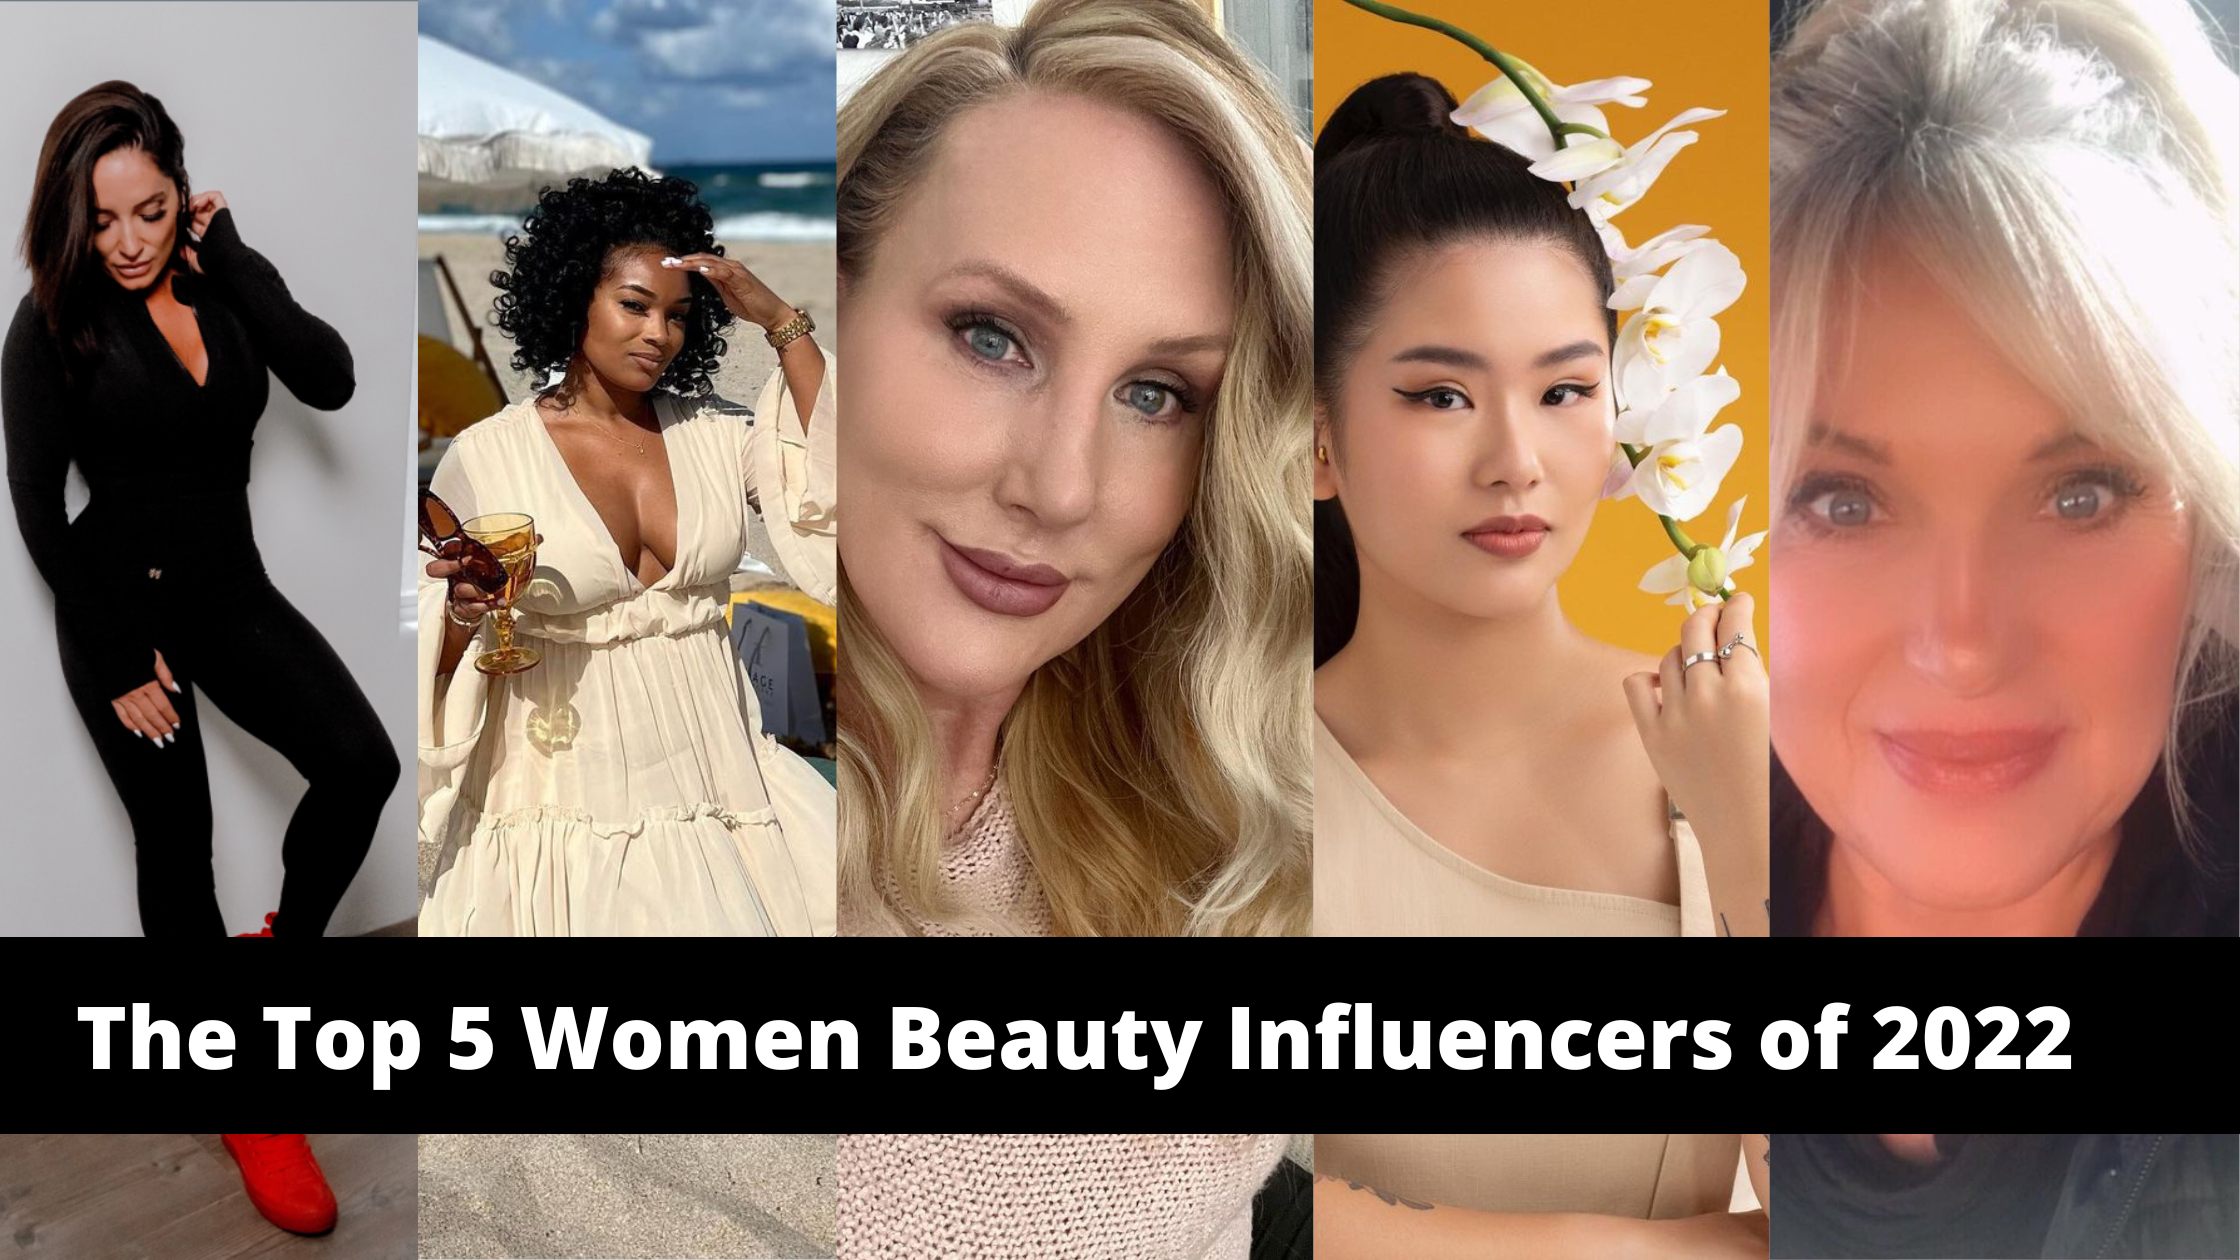 The Top 5 Women Beauty Influencers of 2022